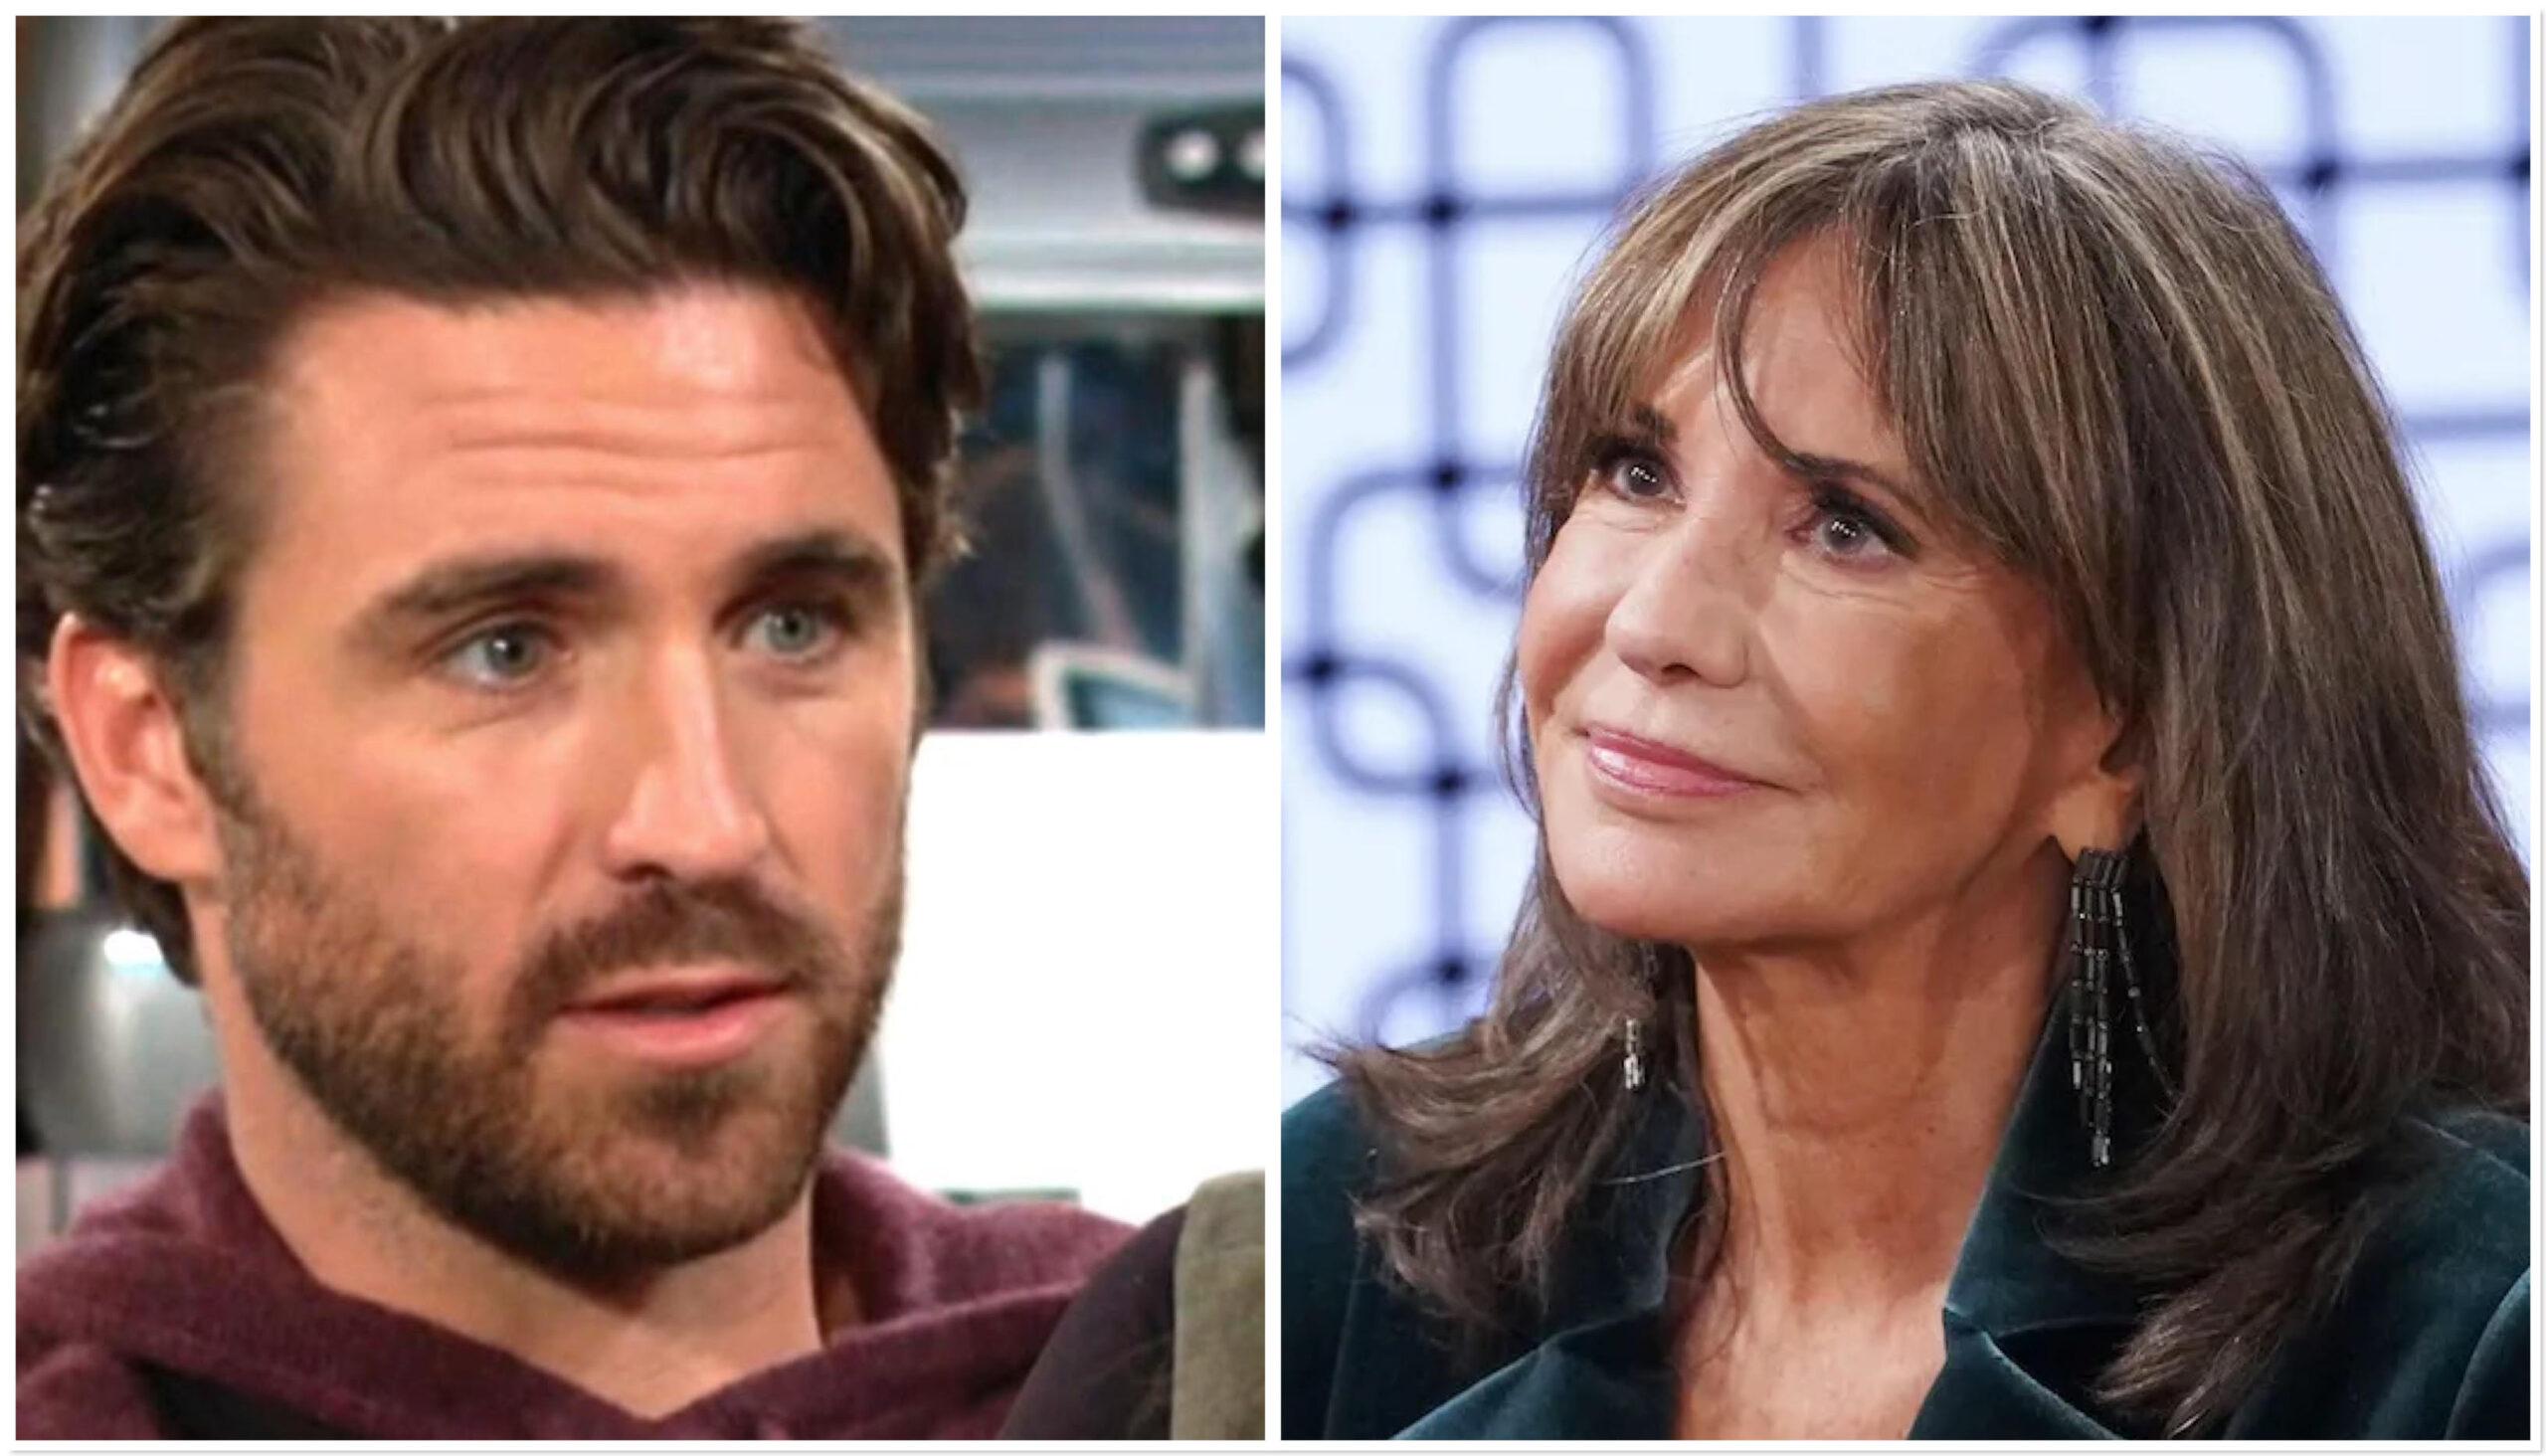 The Young and the Restless spoilers with Chance Chancellor Jill Abbott